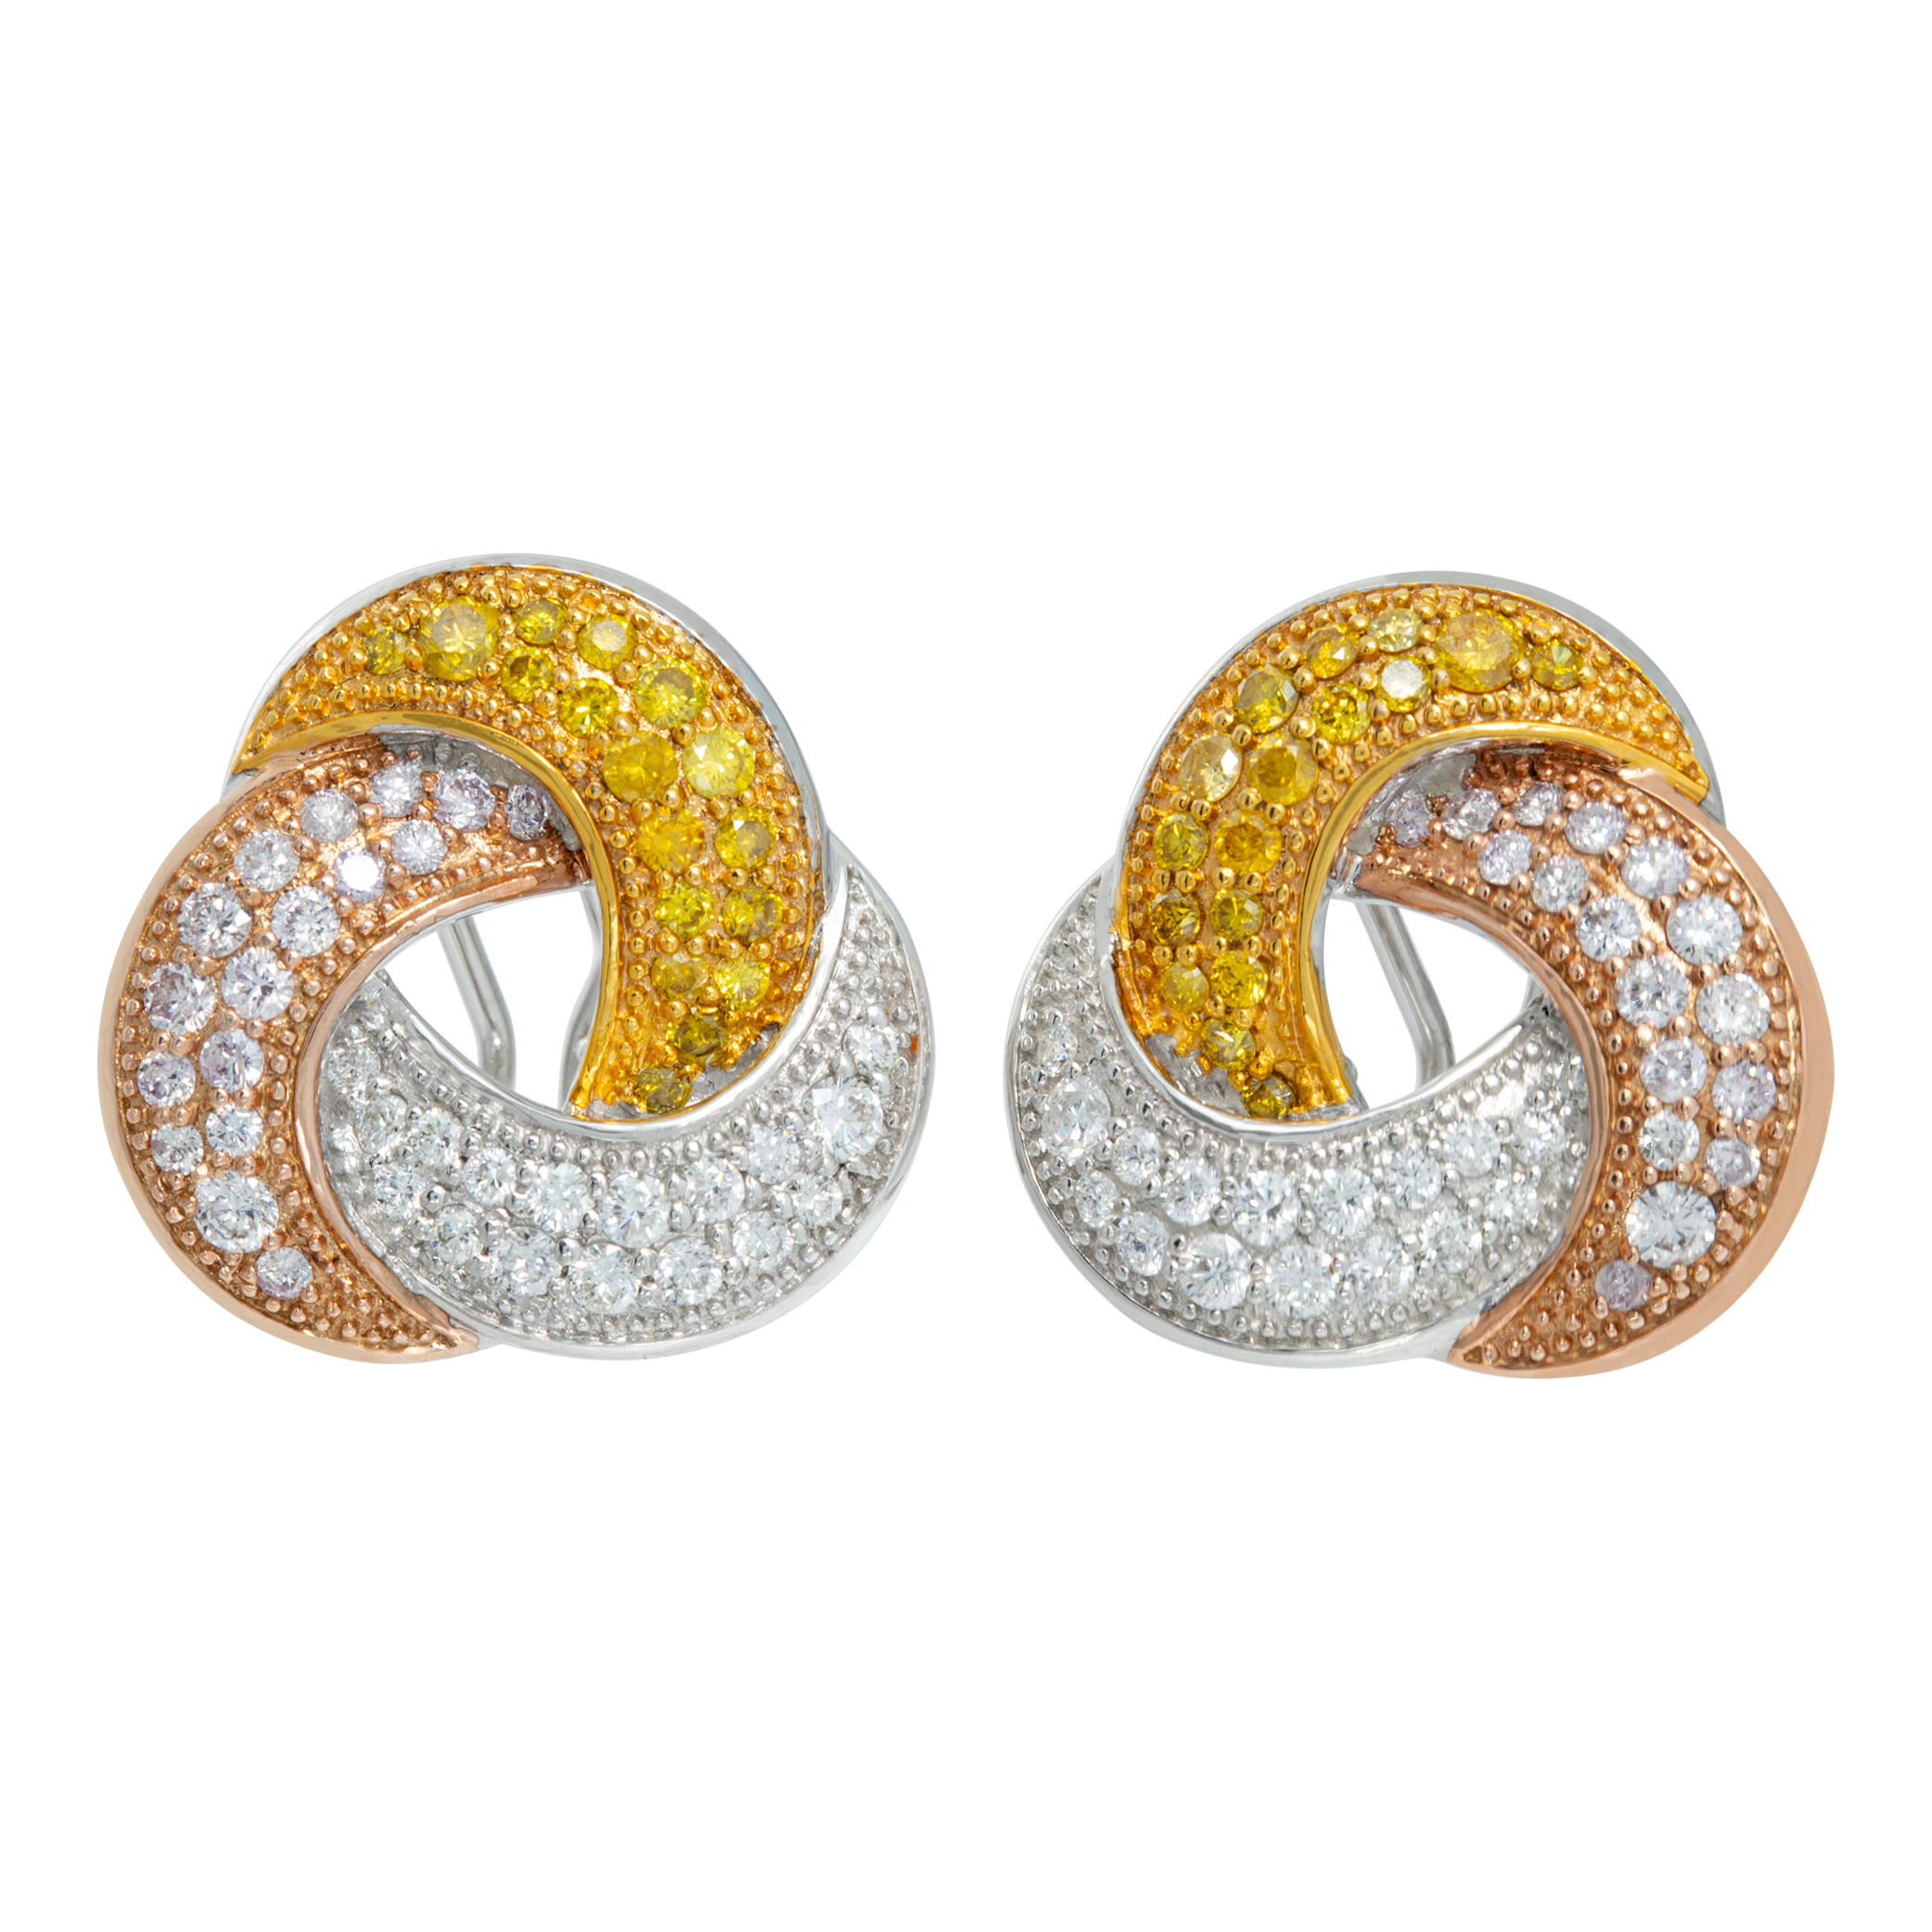 Yellow and white diamonds earrings set in 18K white, yellow and rose gold. Total round brilliant cut diamonds approx weight: 2.10 carats